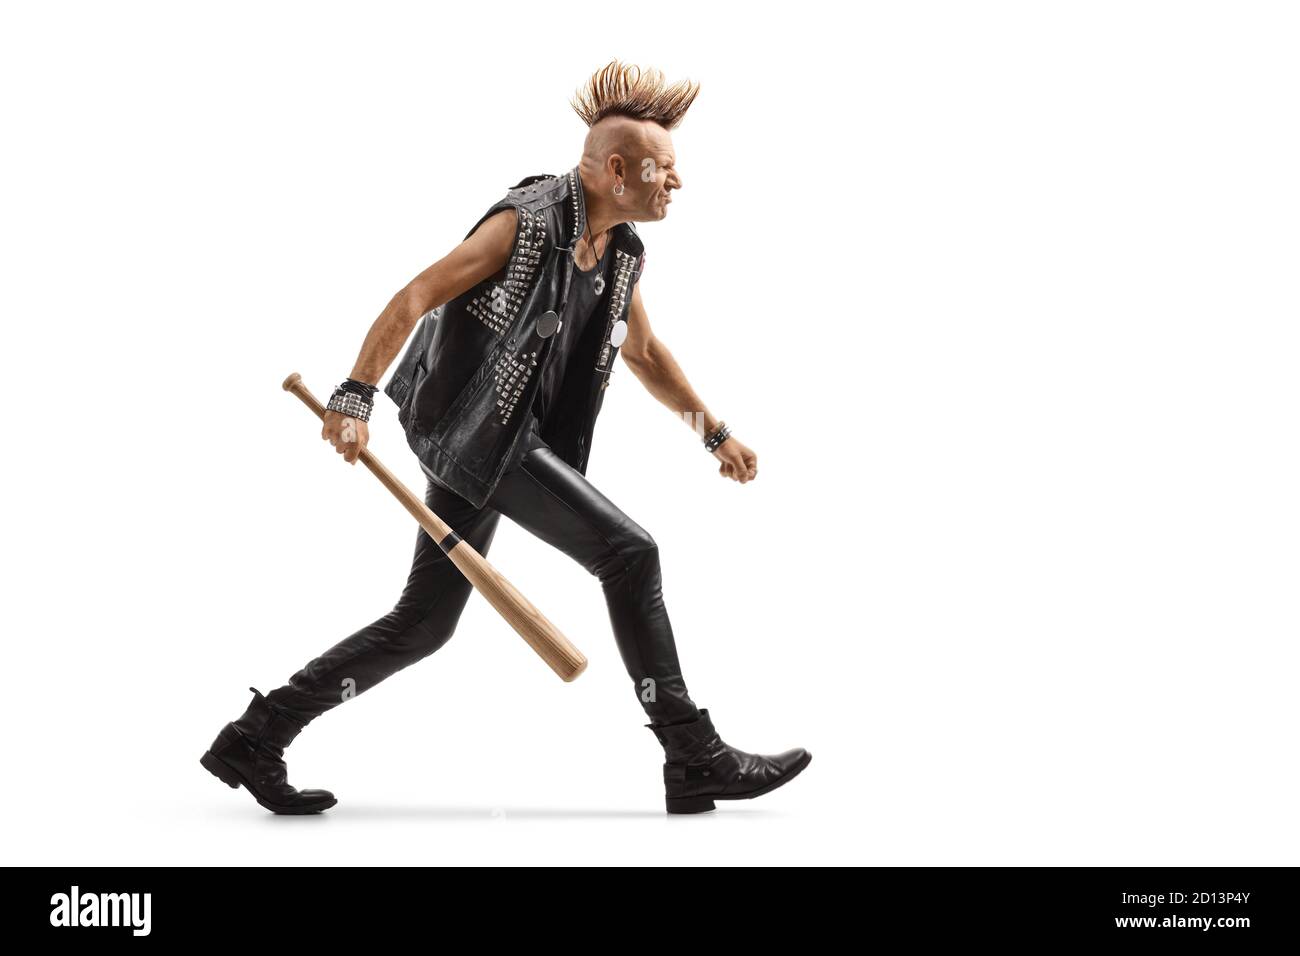 Angry punk rocker with a mohawk running with a baseball bat isolated on white background Stock Photo